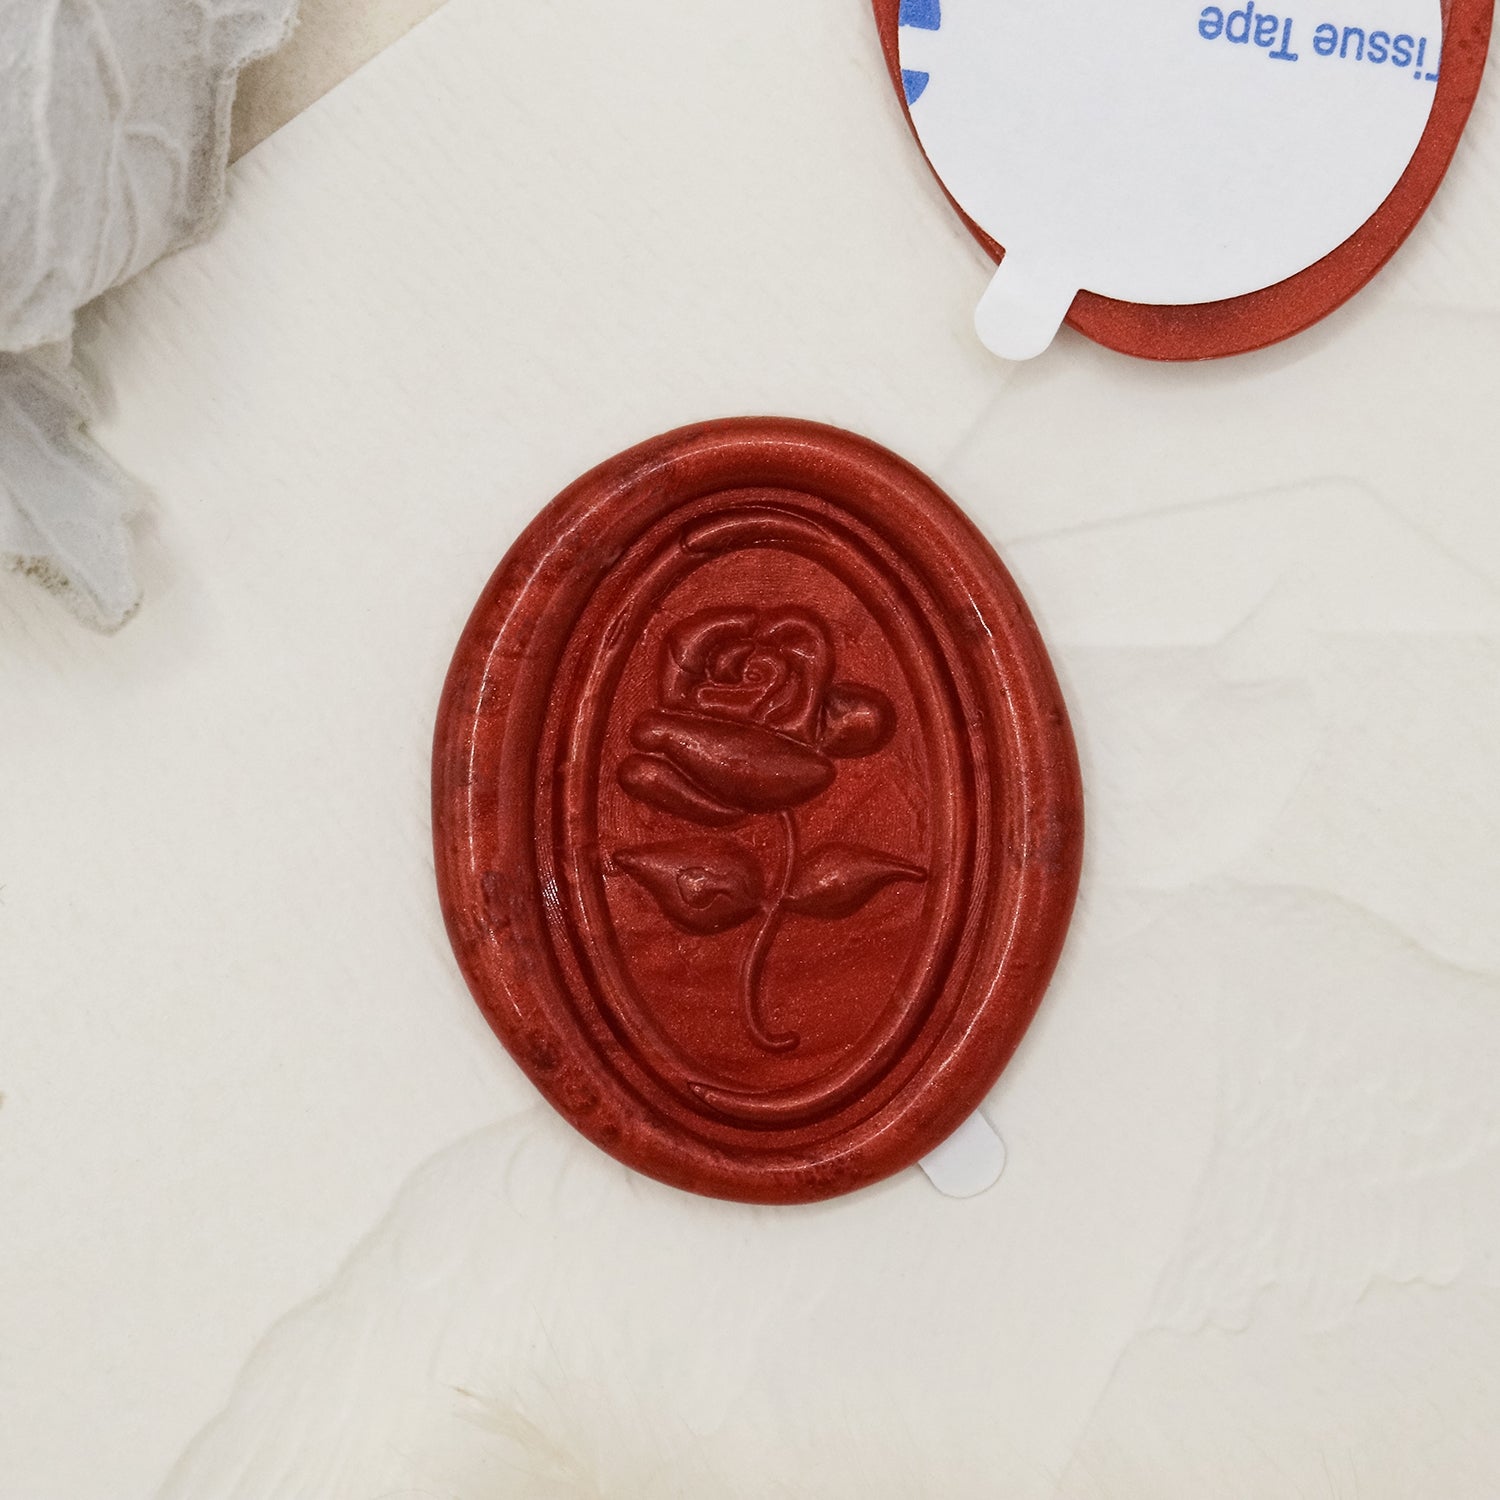 Stamprints 3D Relief Rose Self-adhesive Wax Seal Stickers 1